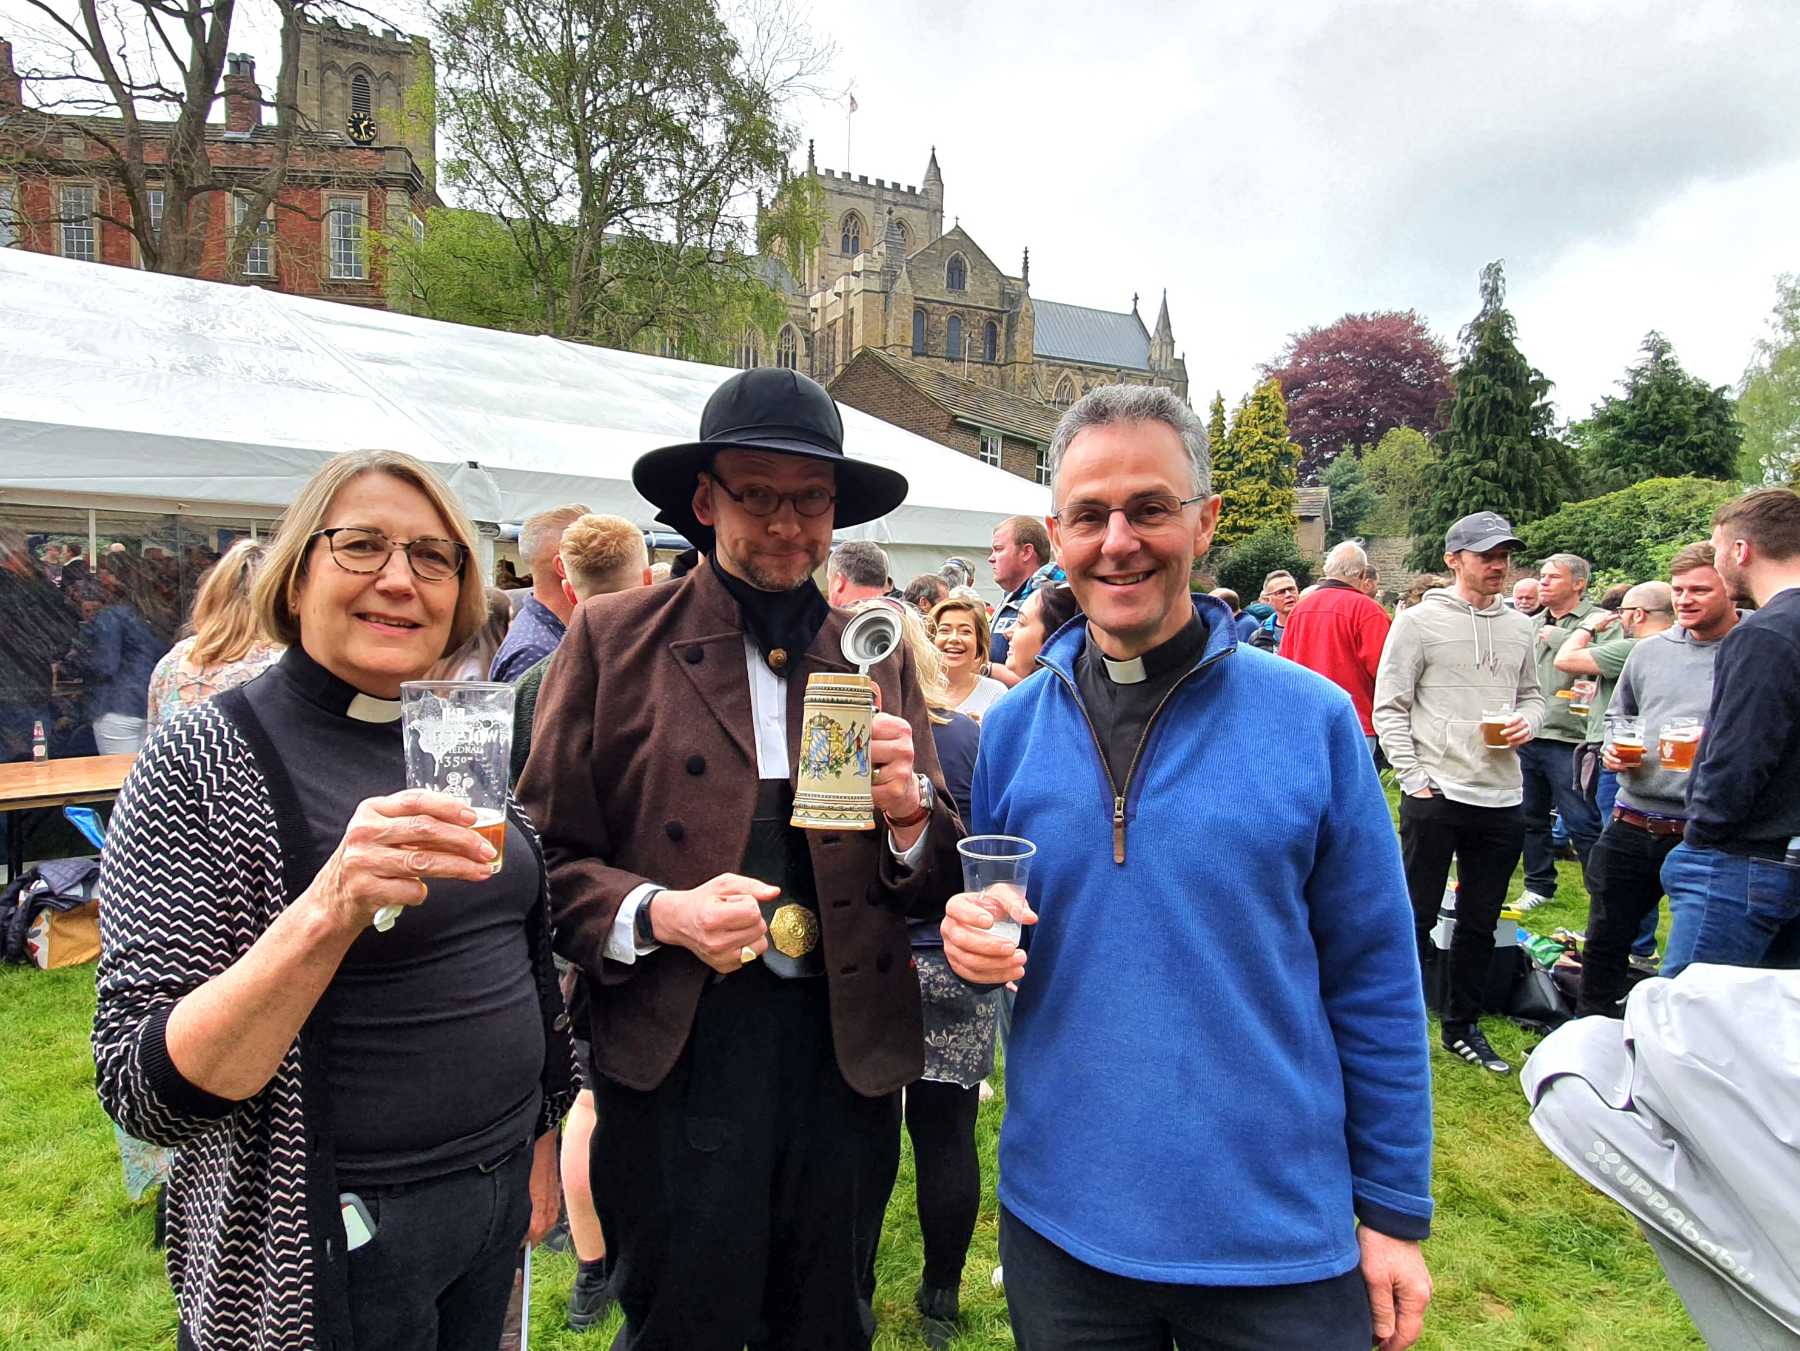 Canon Ailsa Newby, Dr Ronny Krippner (Director of Music) in National Dress of Austria, The Very Rev’d John Dobson, Dean of Ripon at Beer Festival on May Da